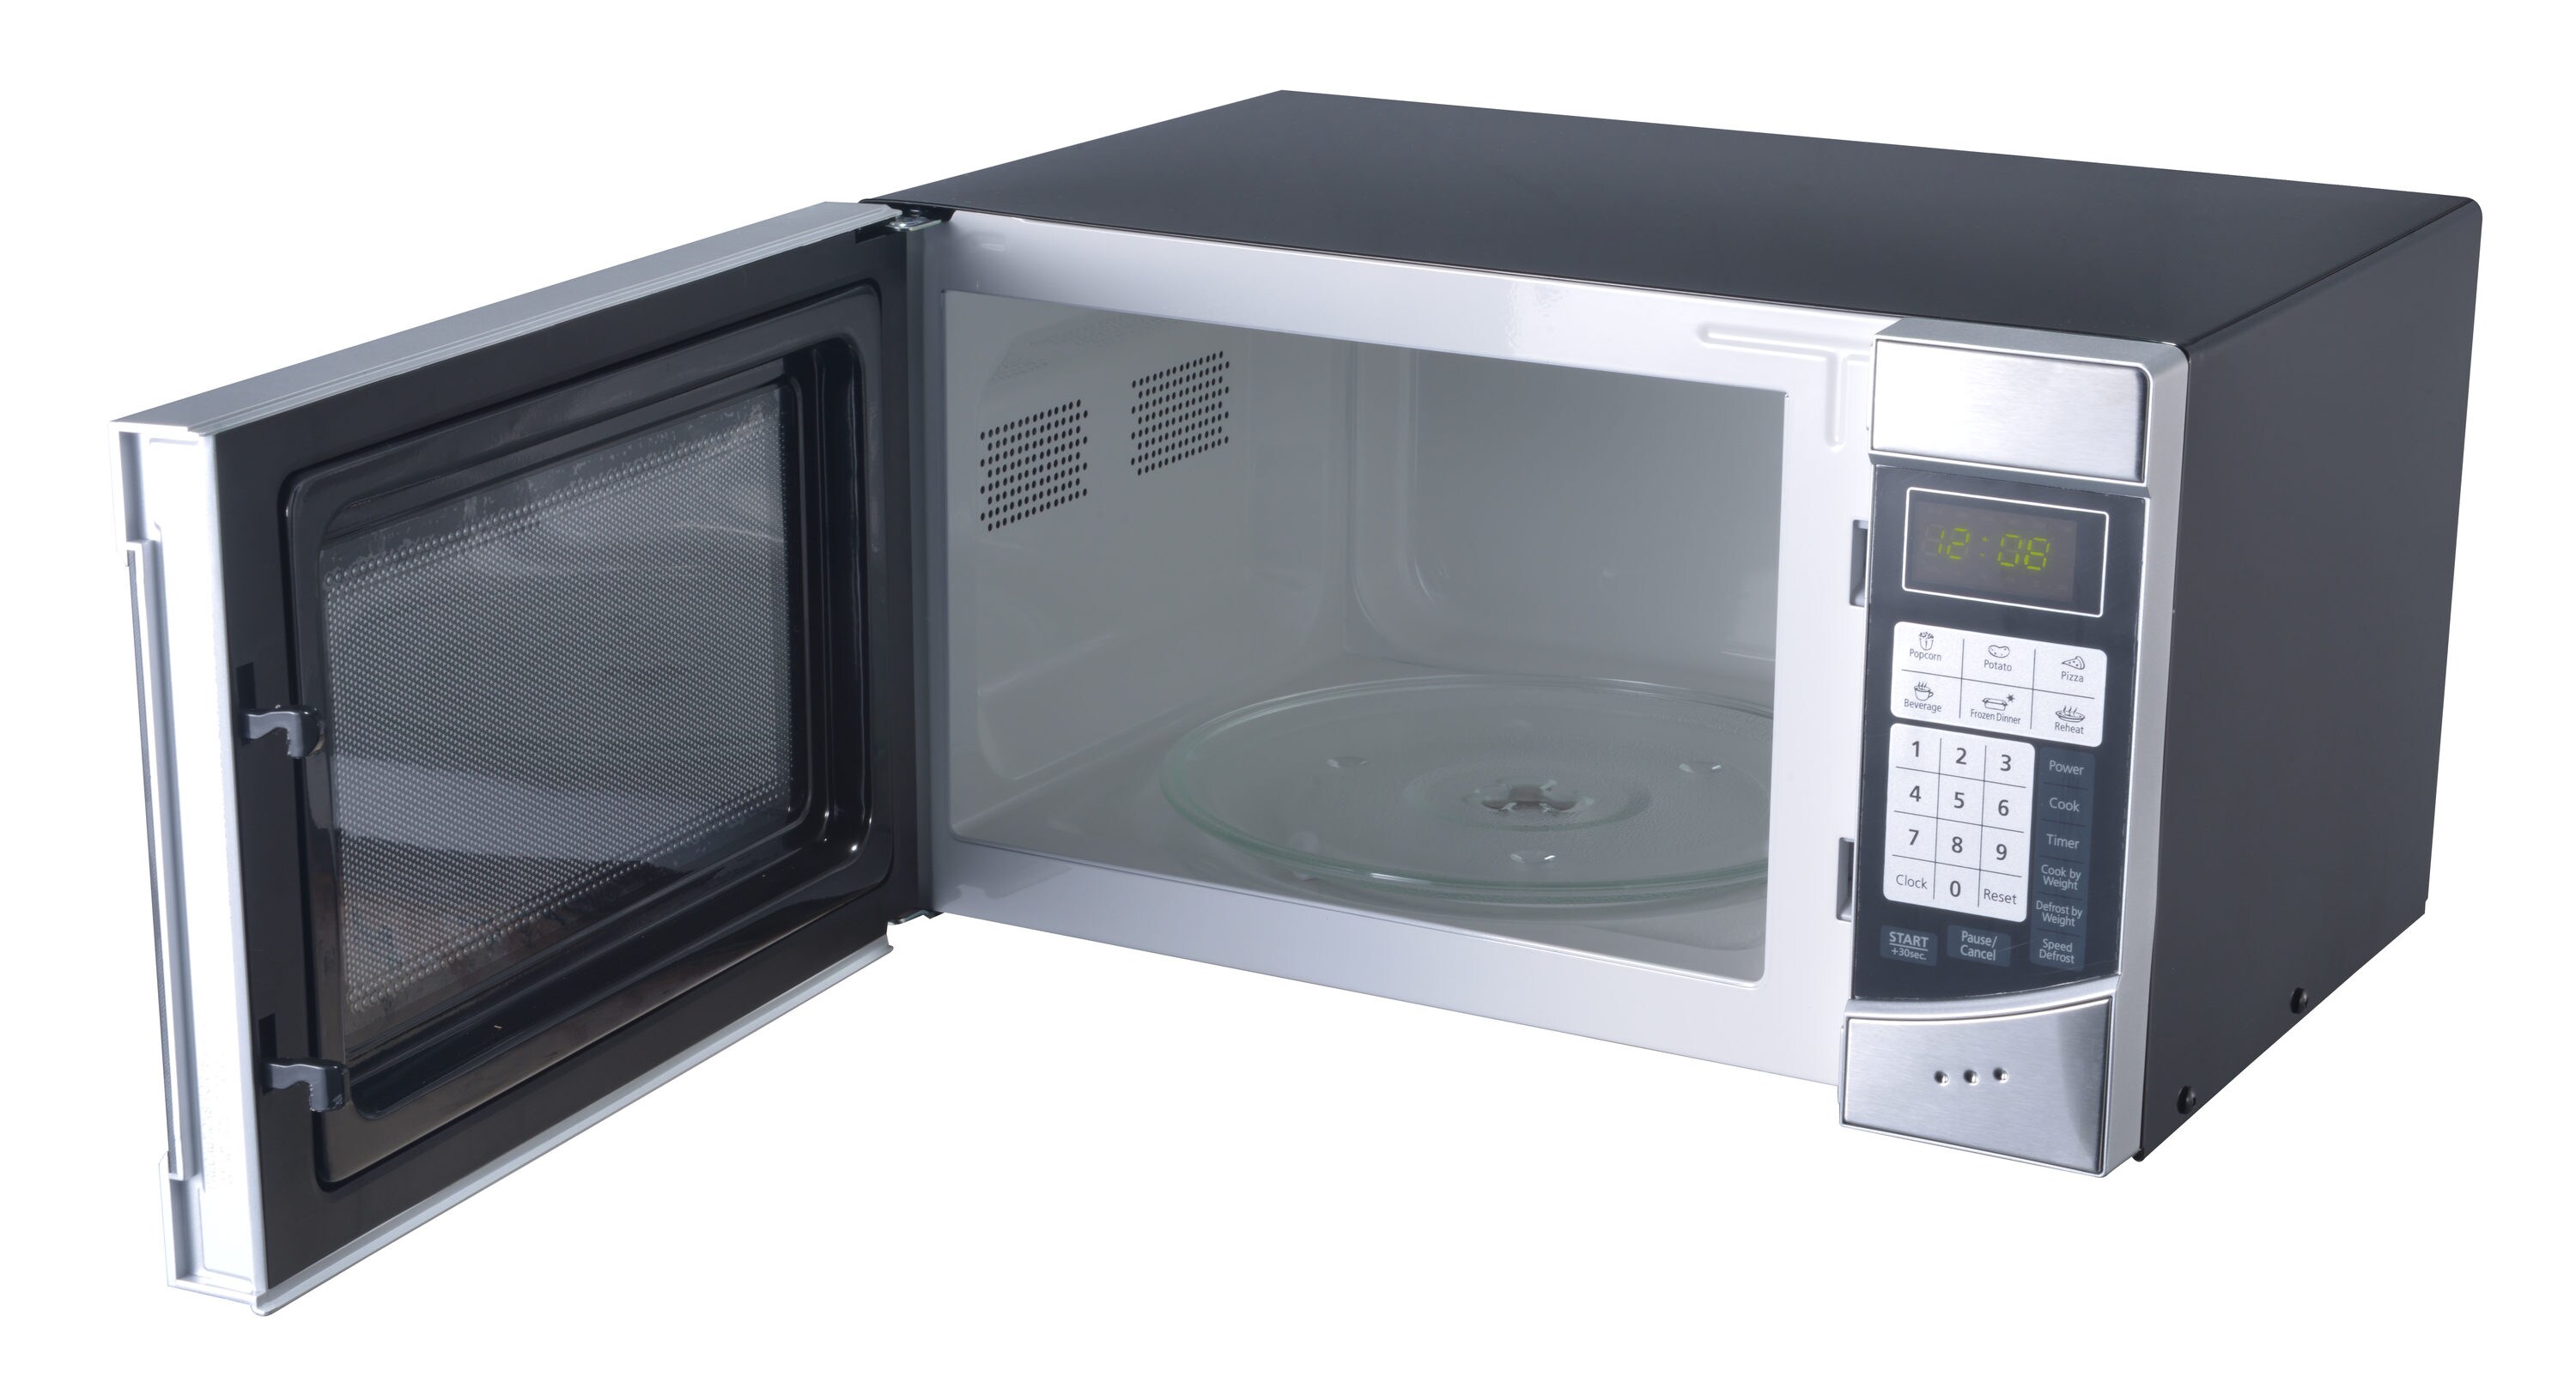 Oster Countertop Turntable Microwave Oven U7 Black 1000W 1.1 CuFt OGB81102